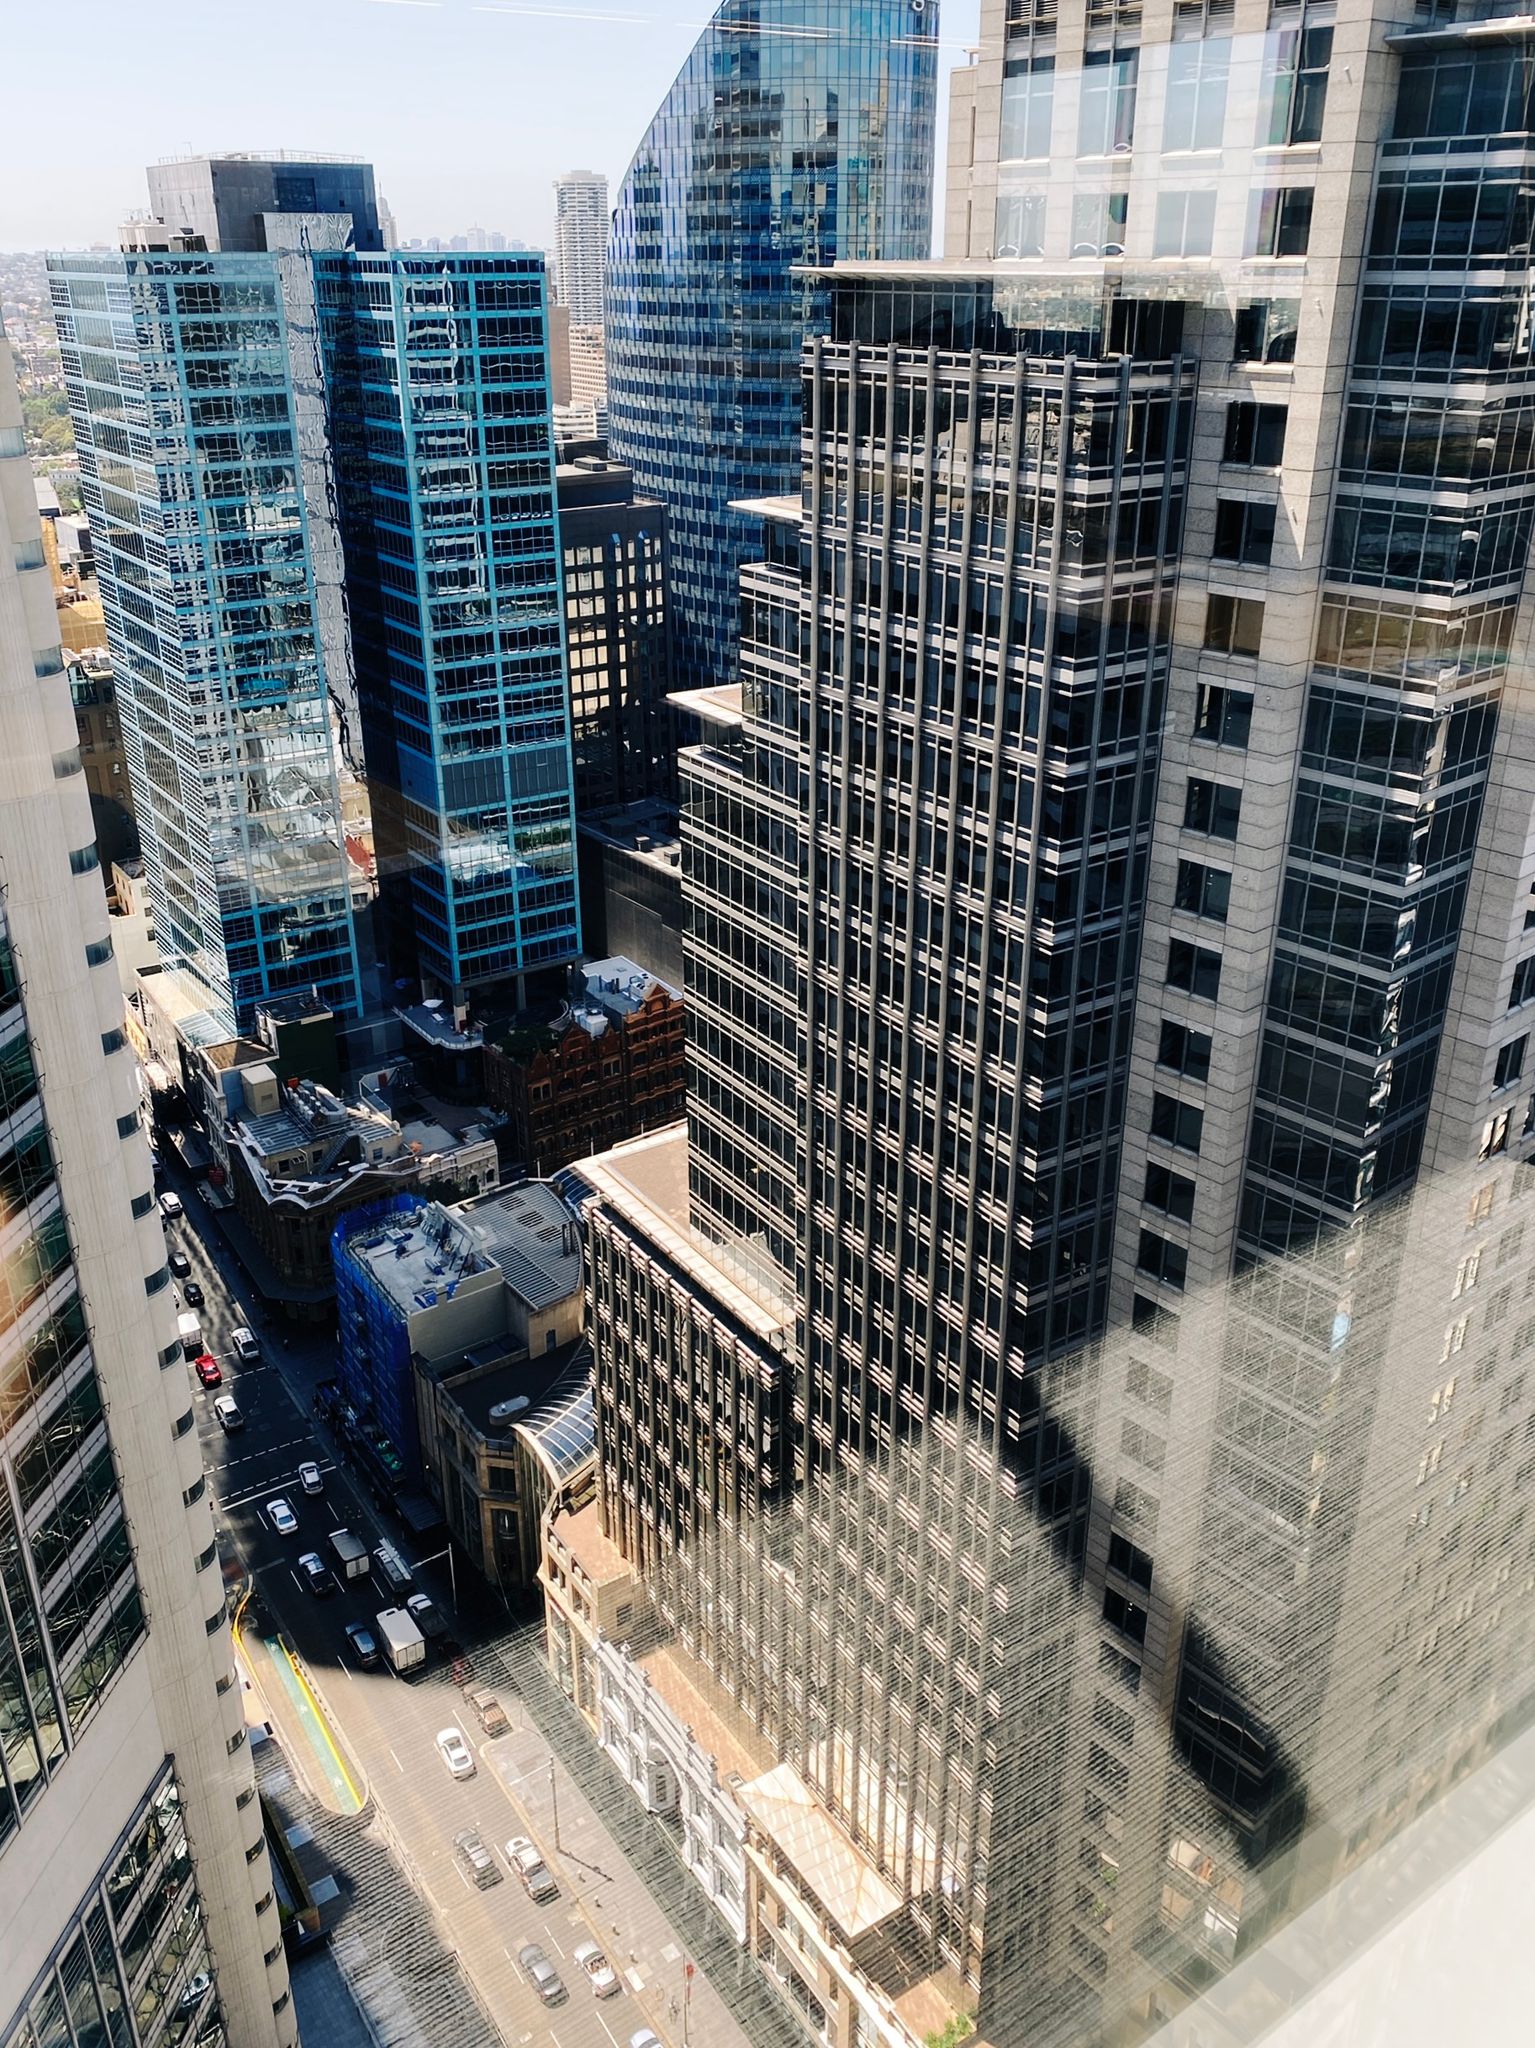 A photo looking out and down at a busy city street with tall buildings everywhere, taken from the 28th floor.